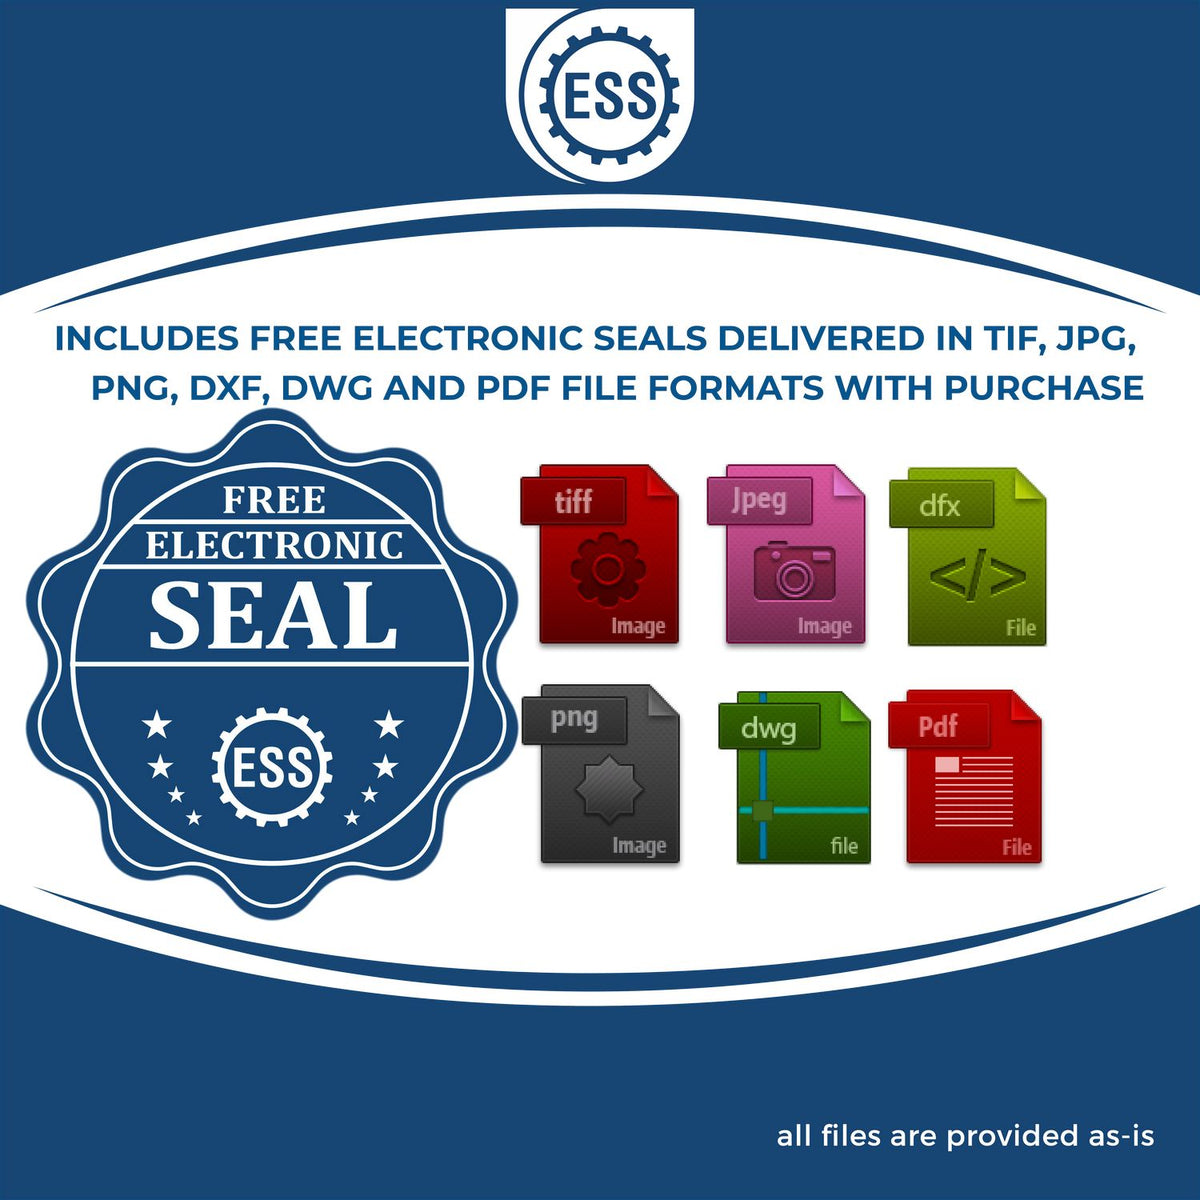 An infographic for the free electronic seal for the Gift New Mexico Architect Seal illustrating the different file type icons such as DXF, DWG, TIF, JPG and PNG.